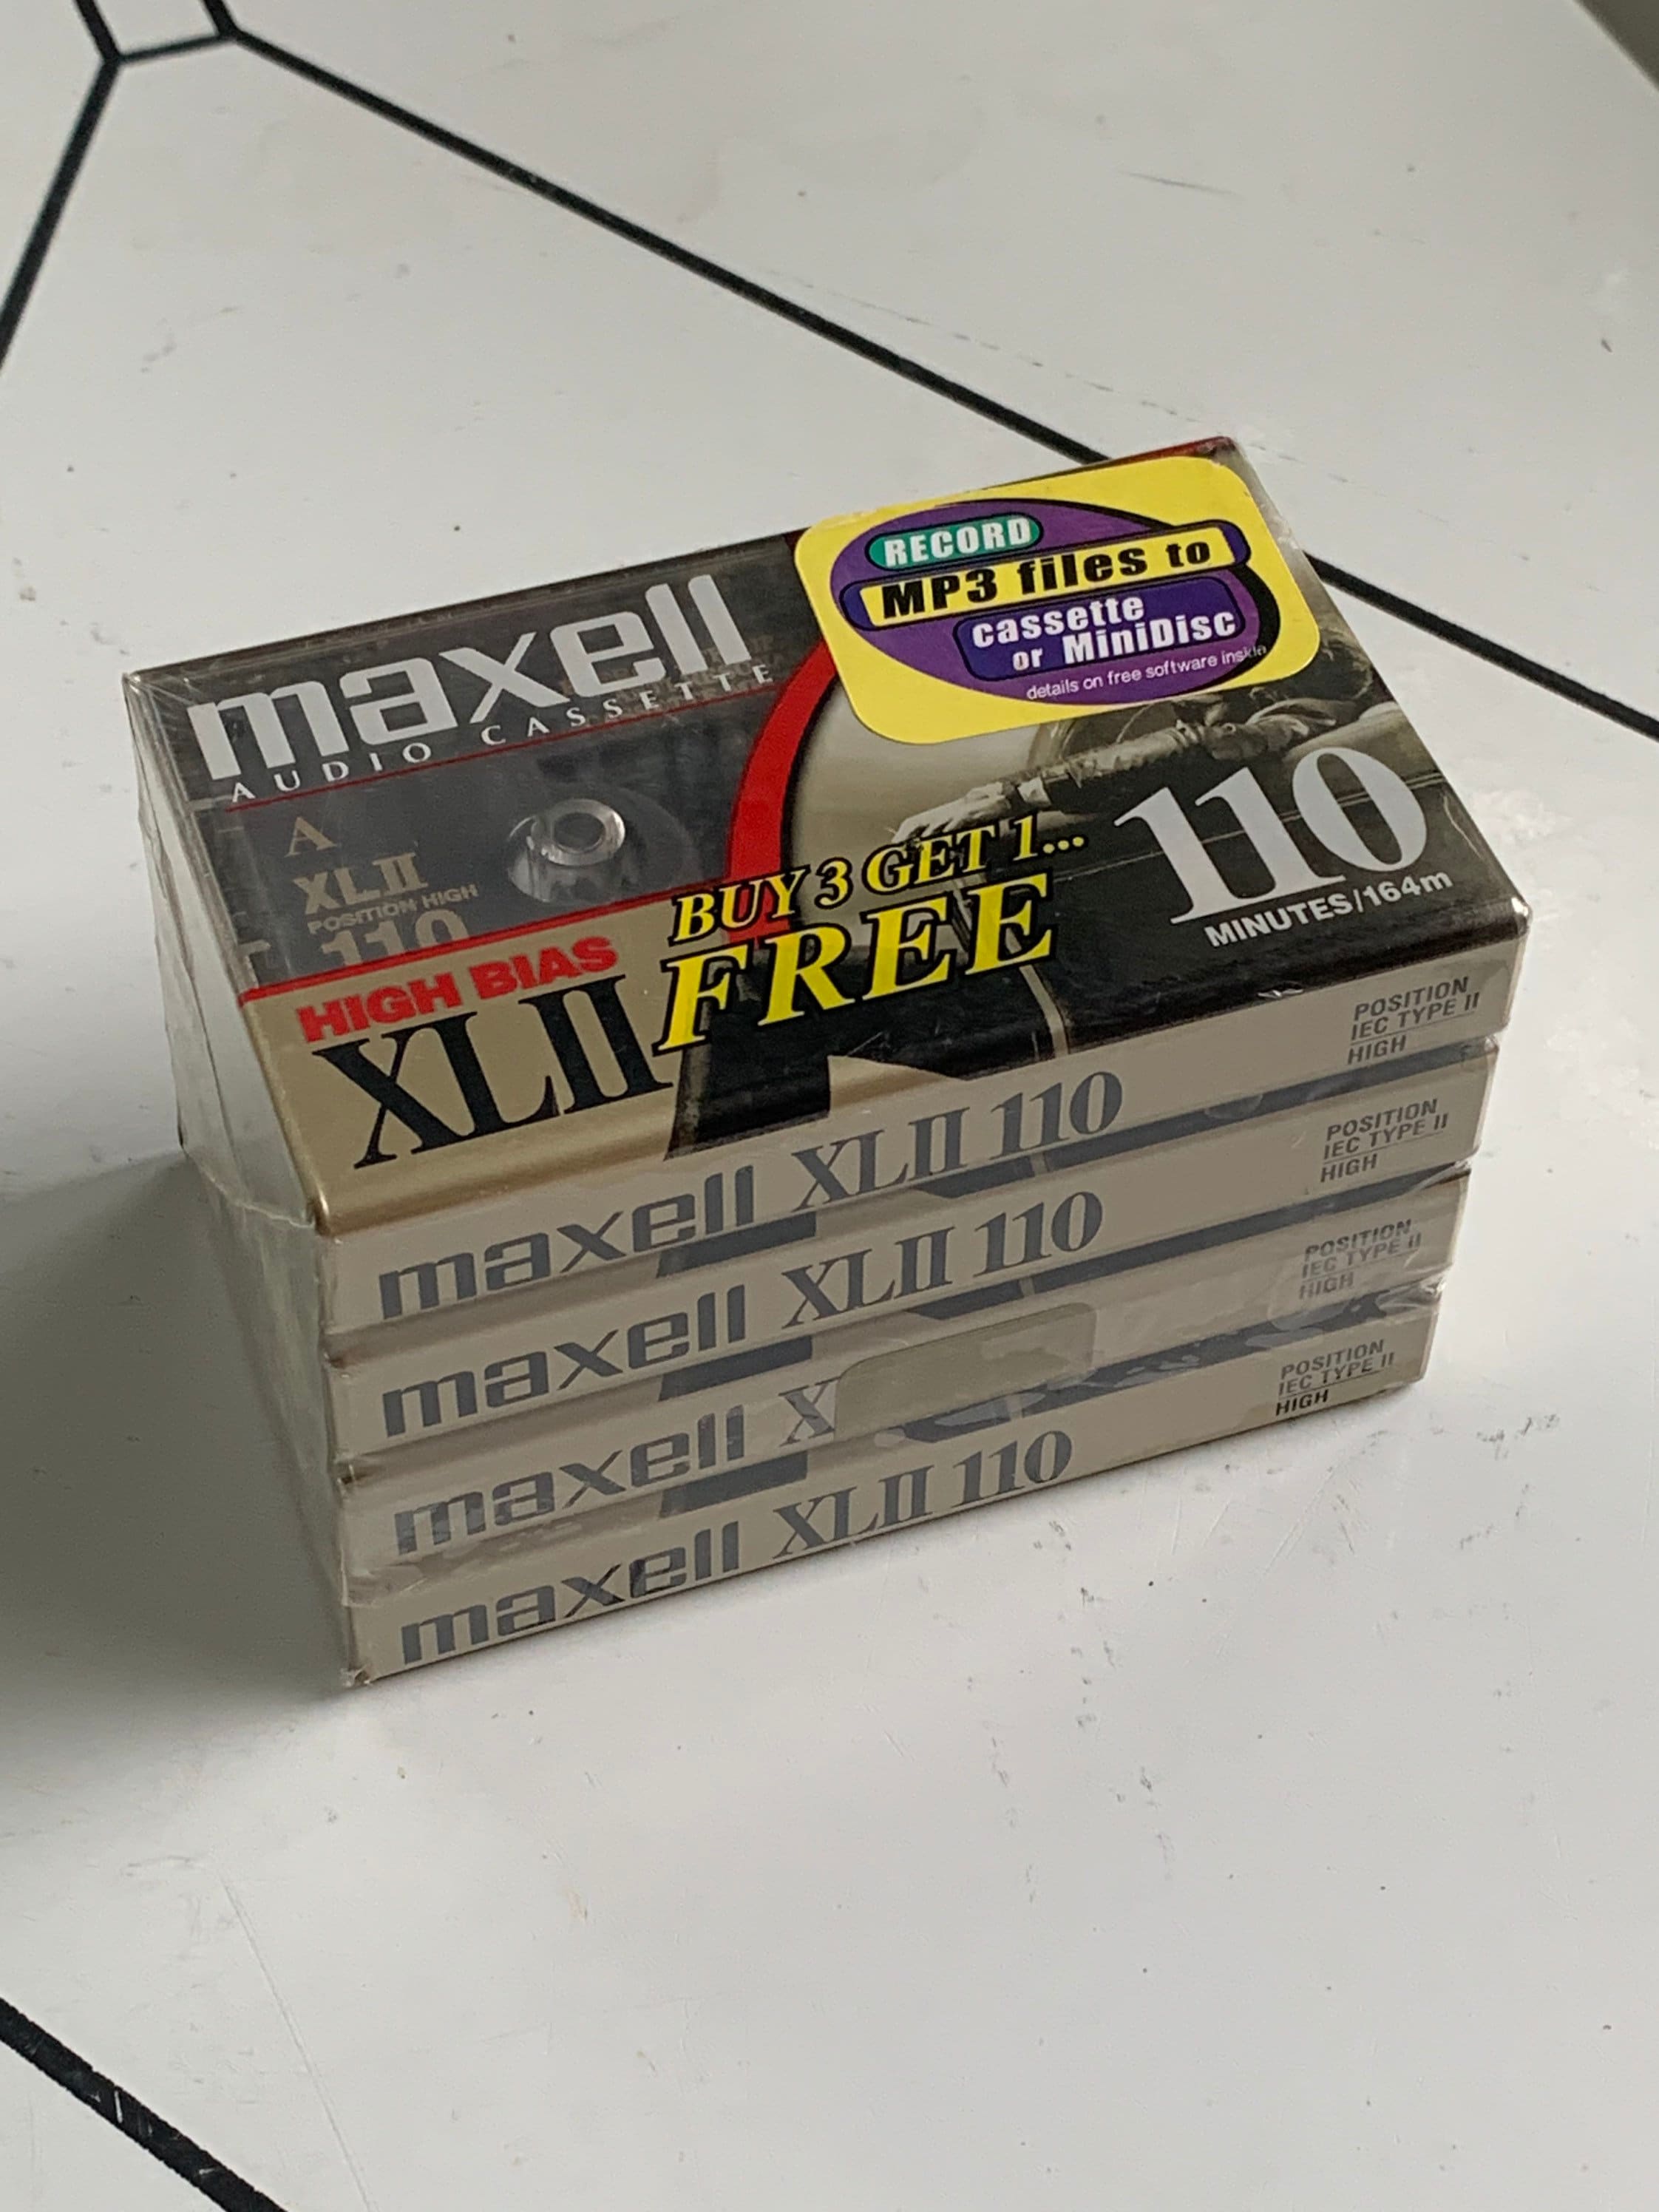 Maxell XLll 110 audio cassettes 4 pack